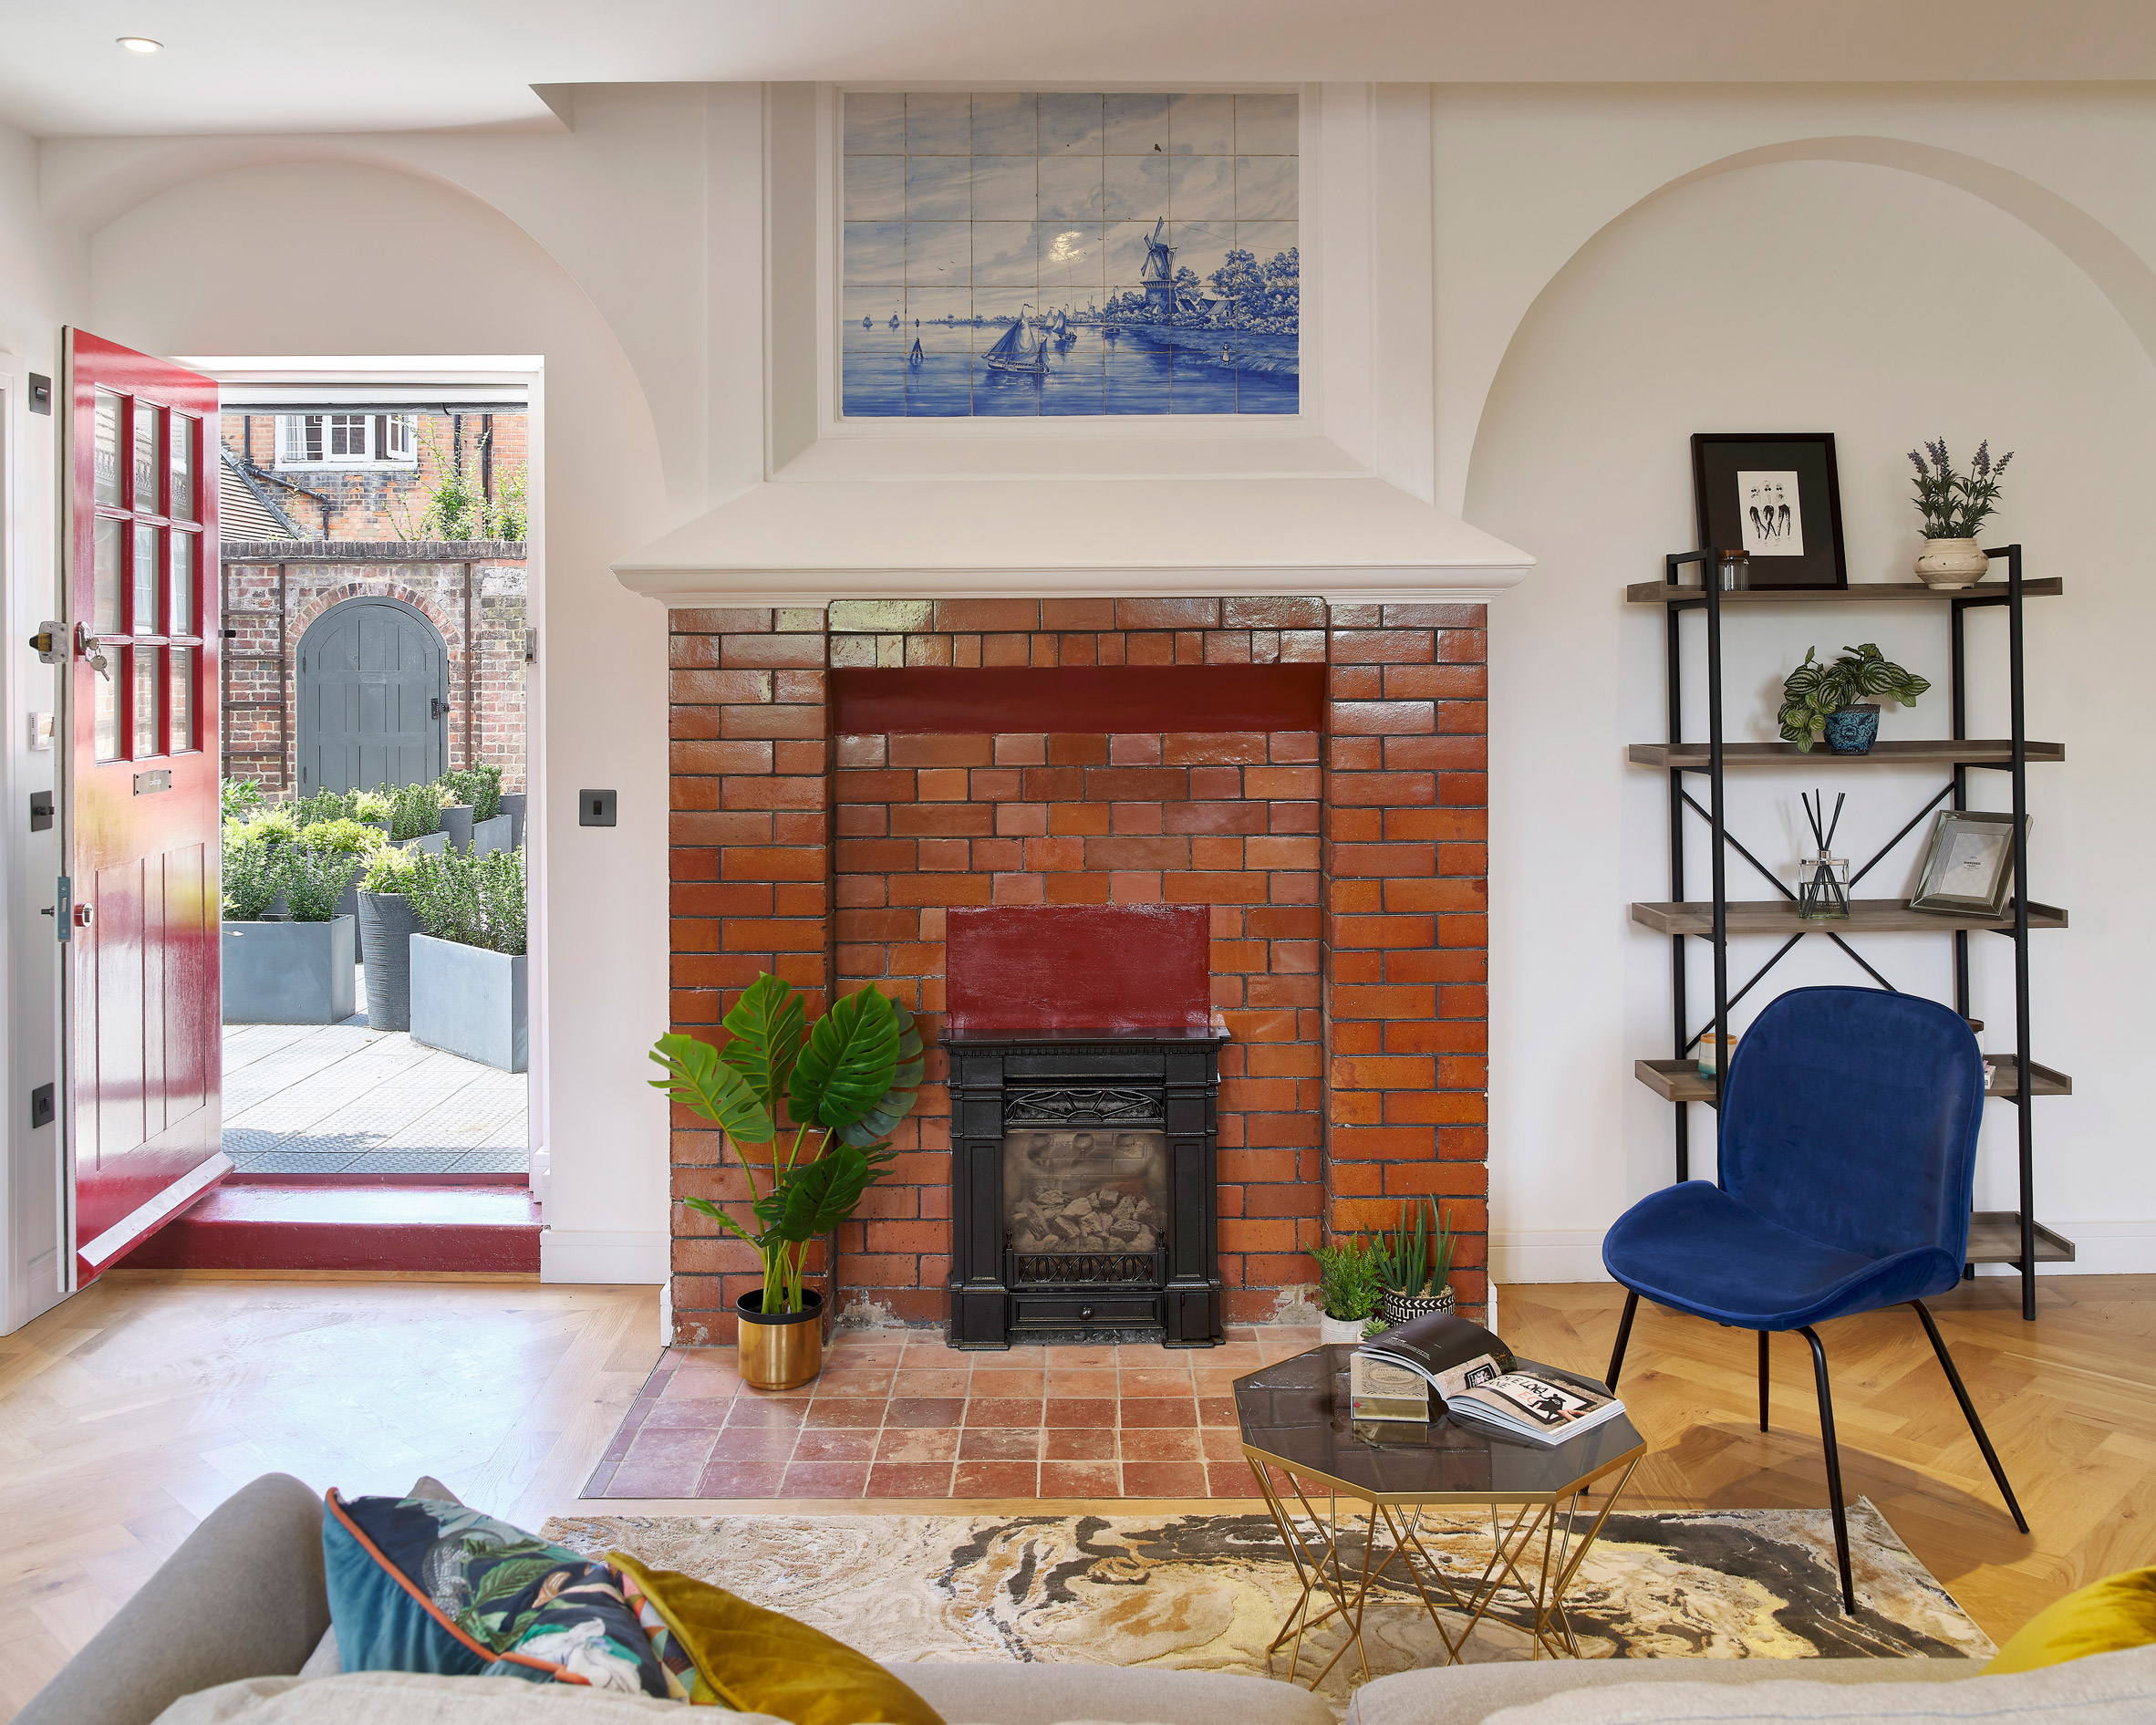 Fireplace in Belsize Fire Station, converted into apartments by Tate Harmer, London